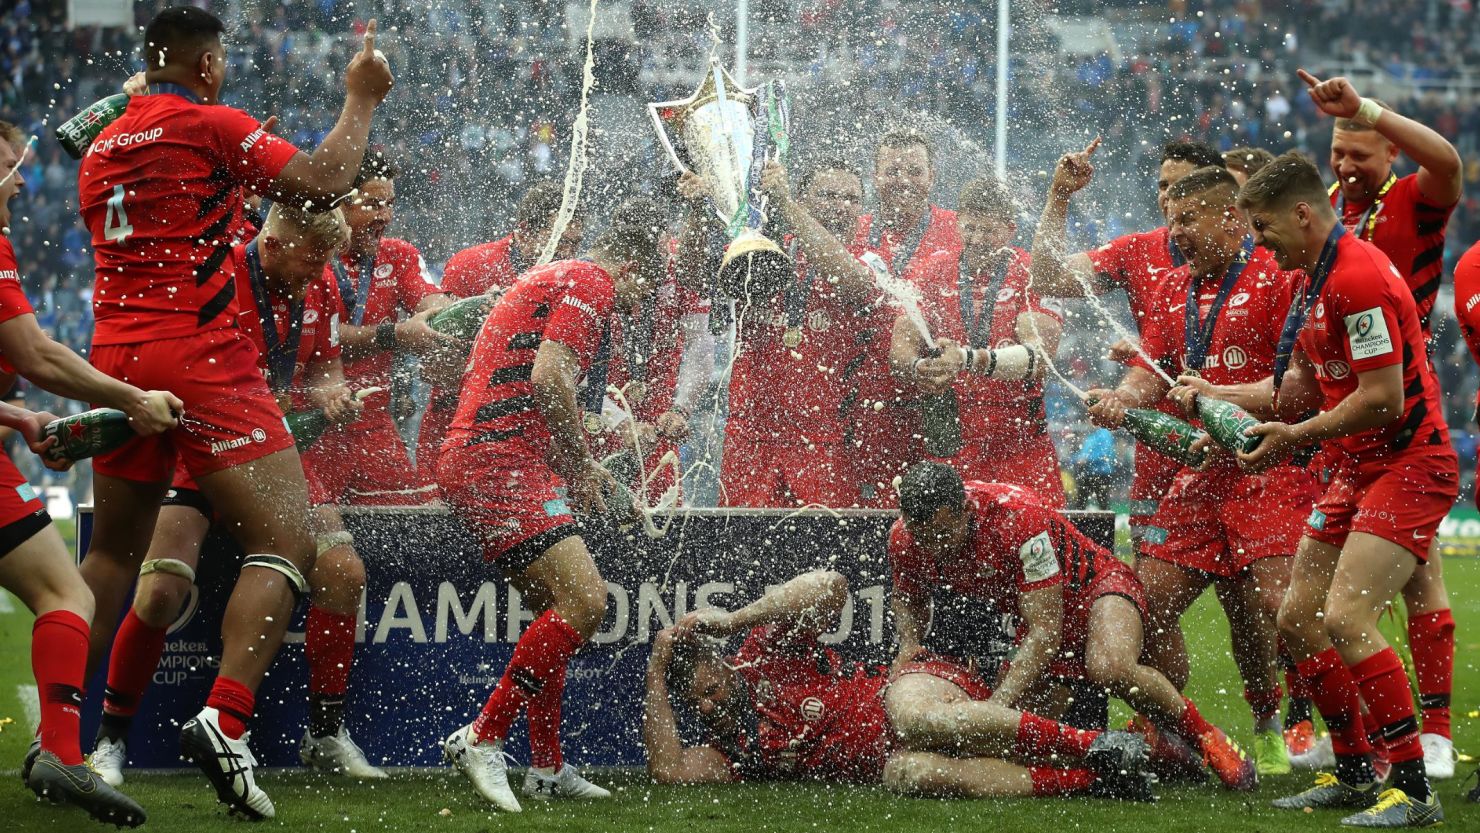 Saracens players celebrate winning the 2019 European Champions Cup